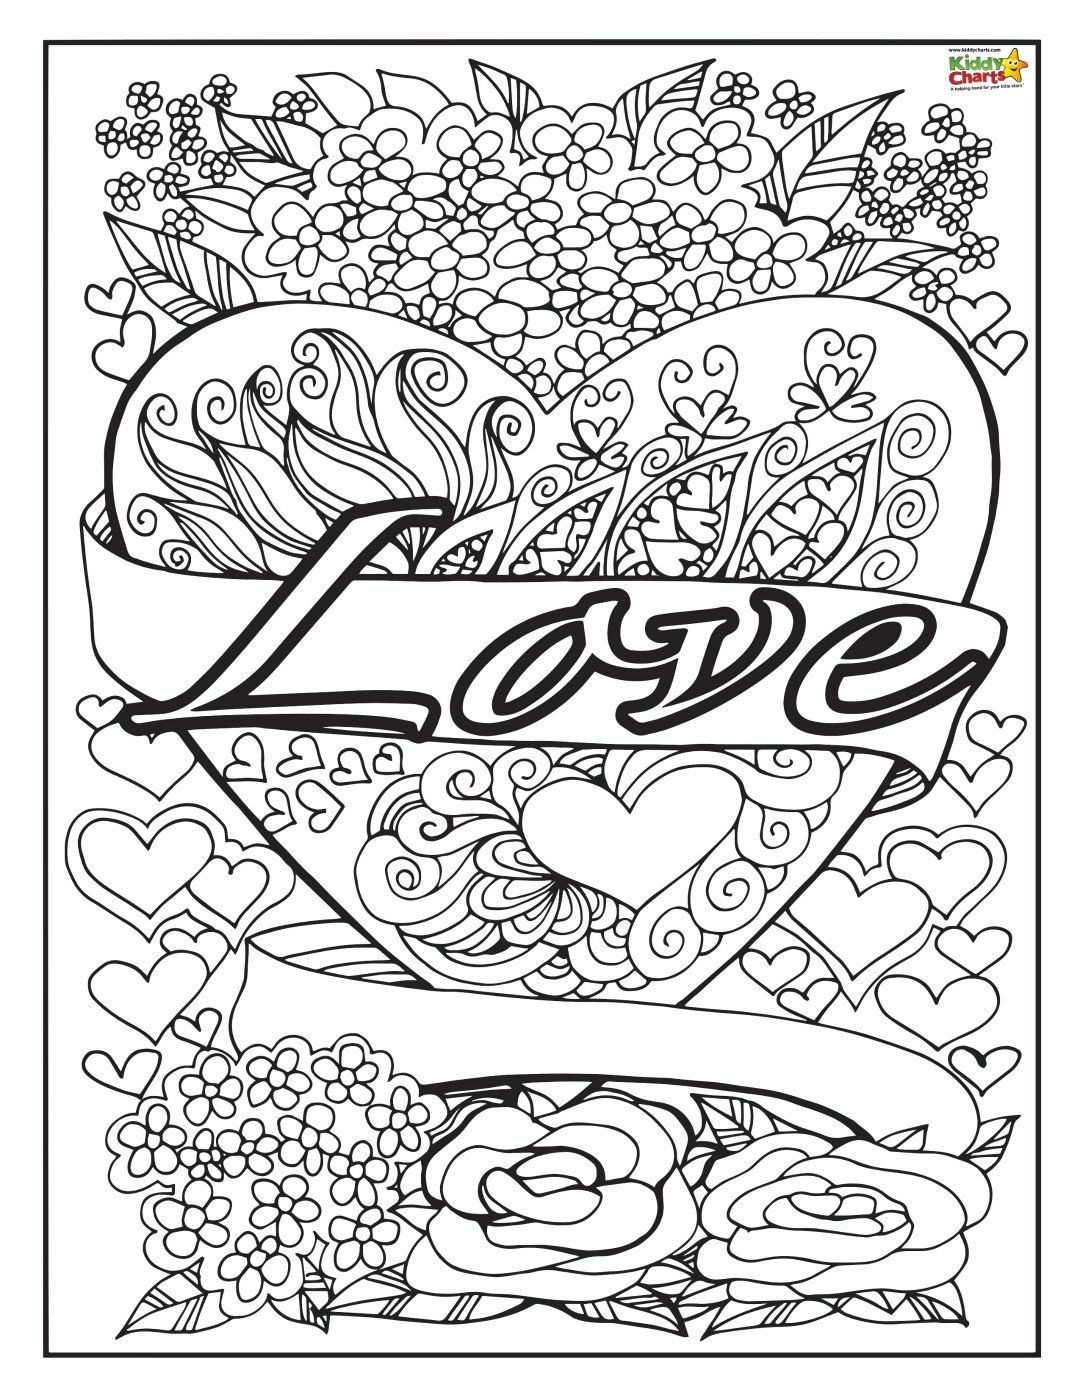 Love adult and kids coloring pages kindweeks